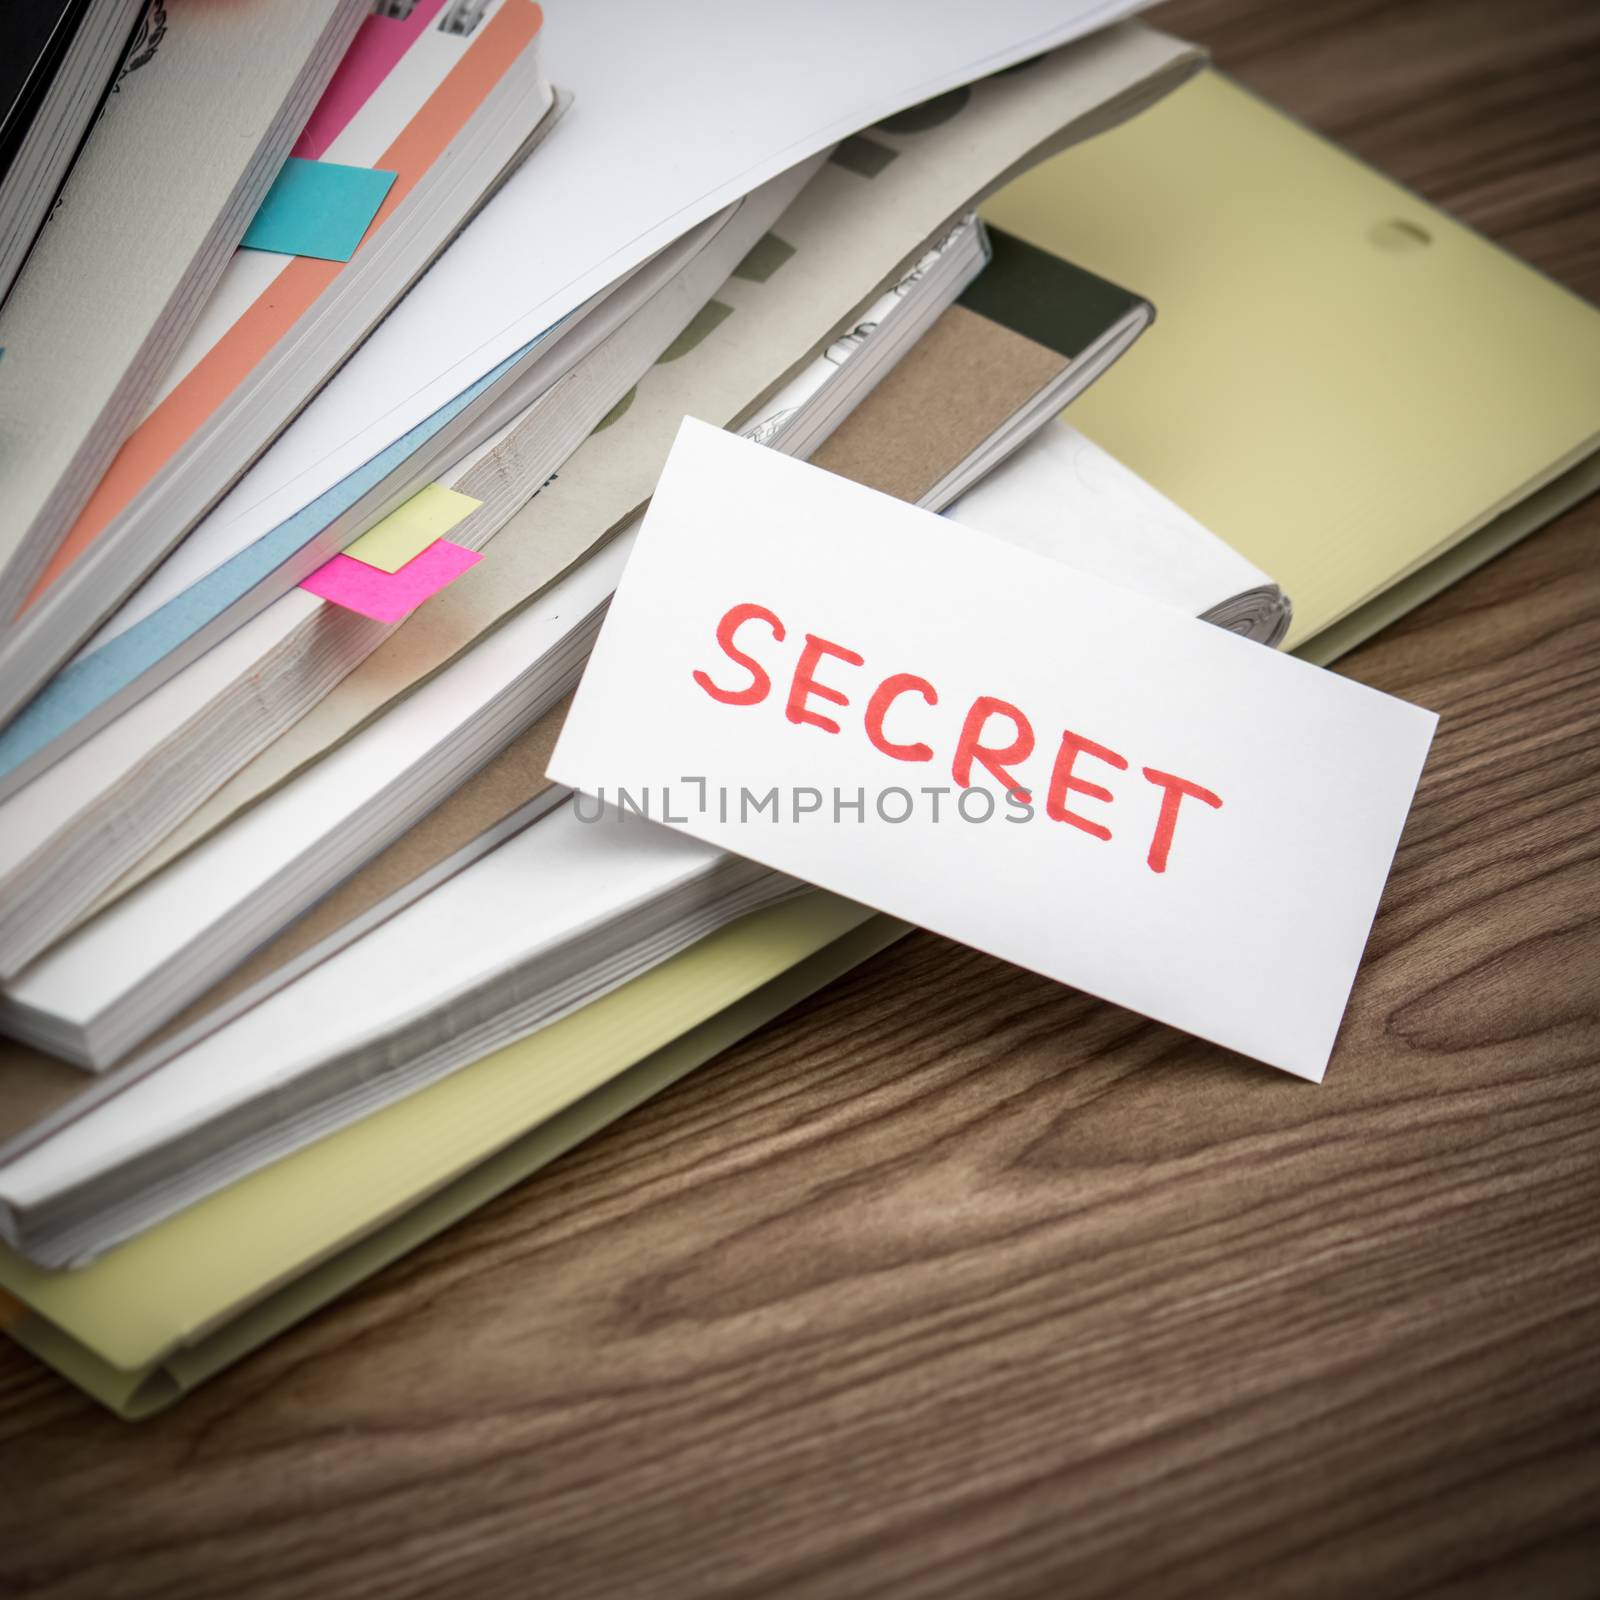 Secret; The Pile of Business Documents on the Desk by EikoTsuttiy